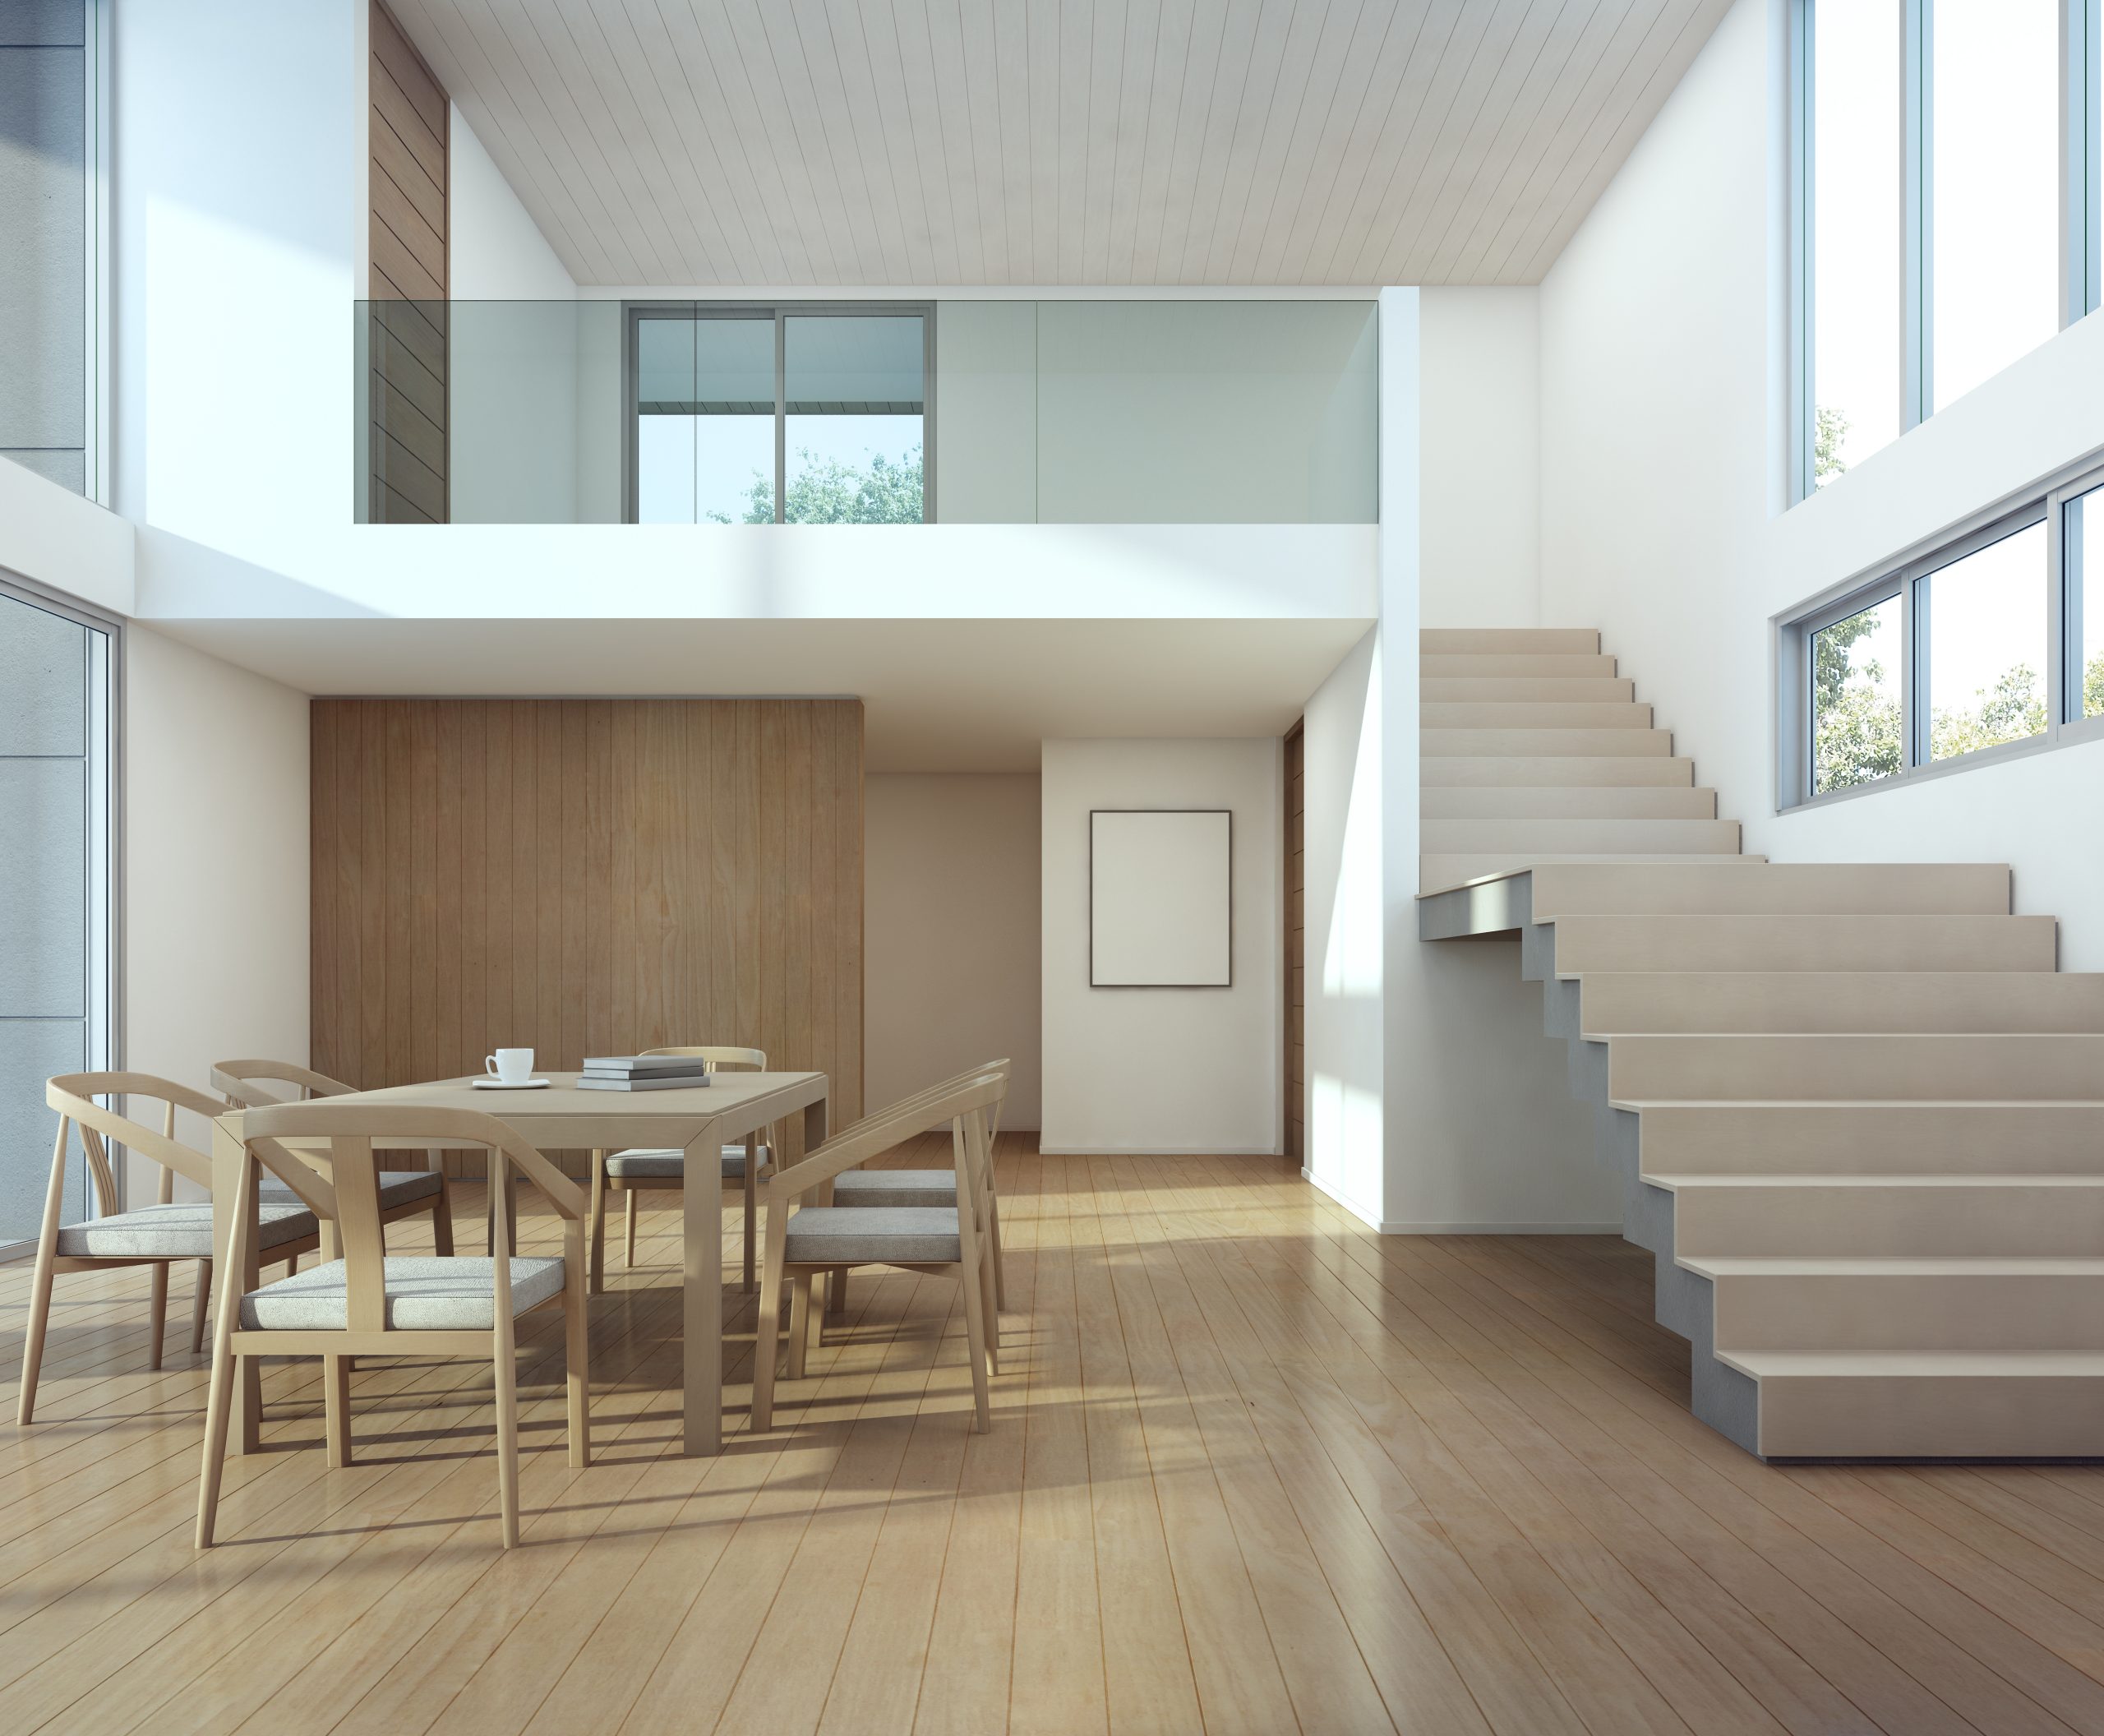 Meeting and dining room in modern house - 3d rendering